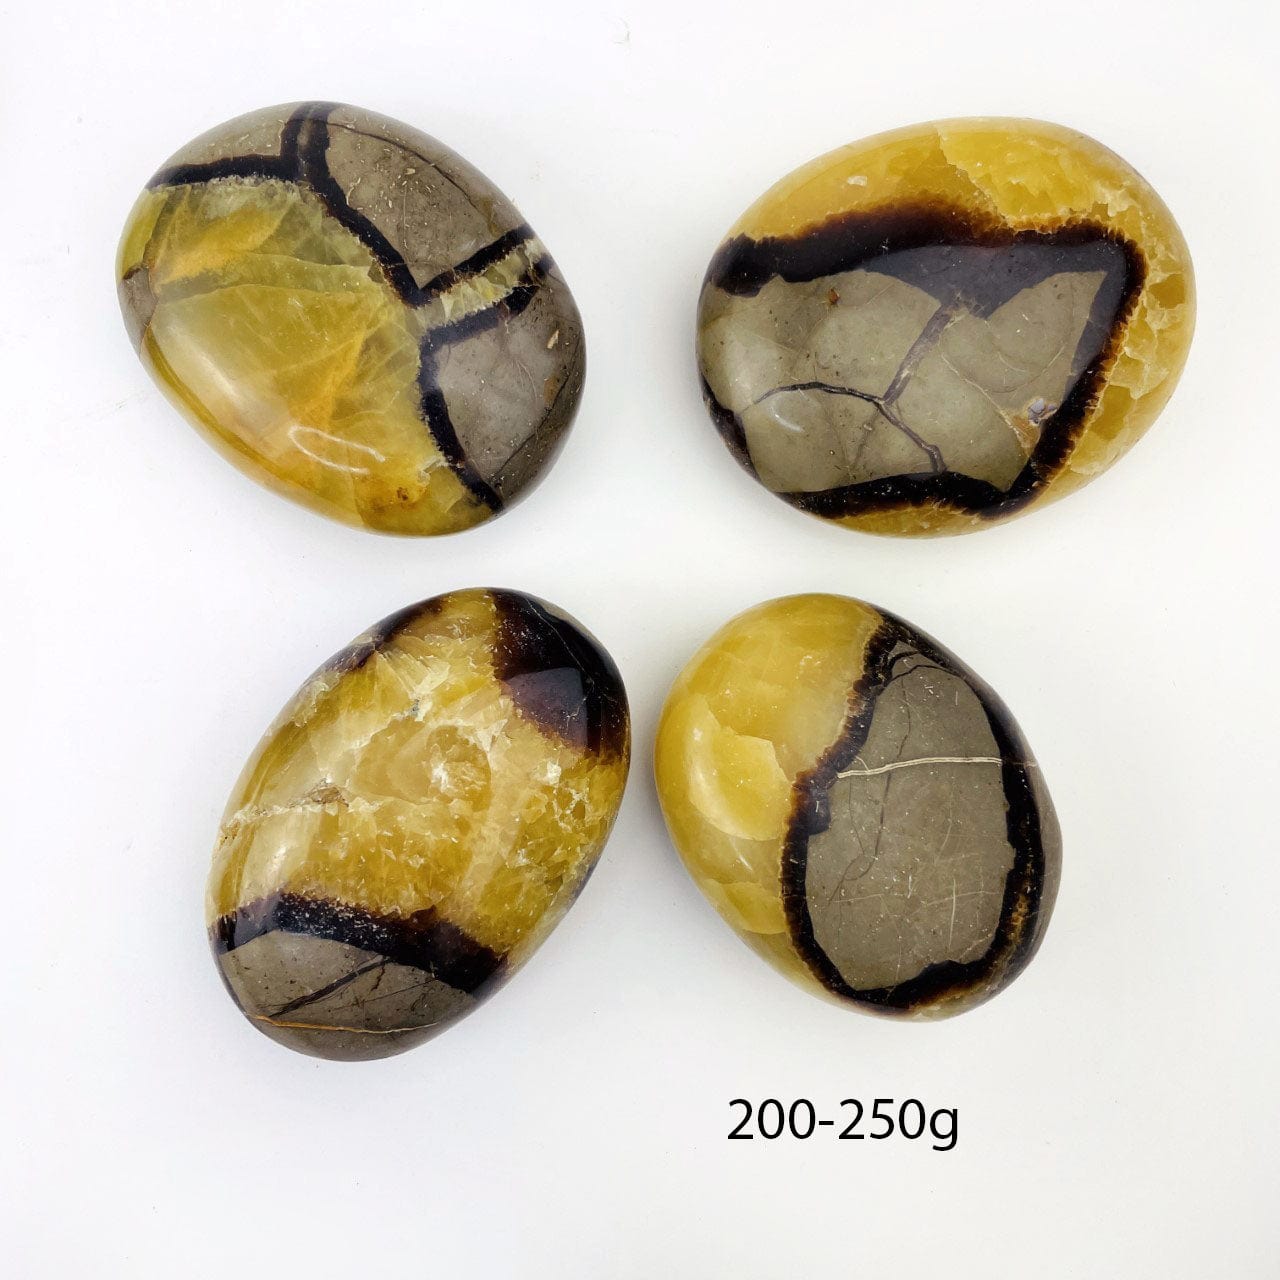 Septarian Tumbled Palm Stone in the 200-250g size